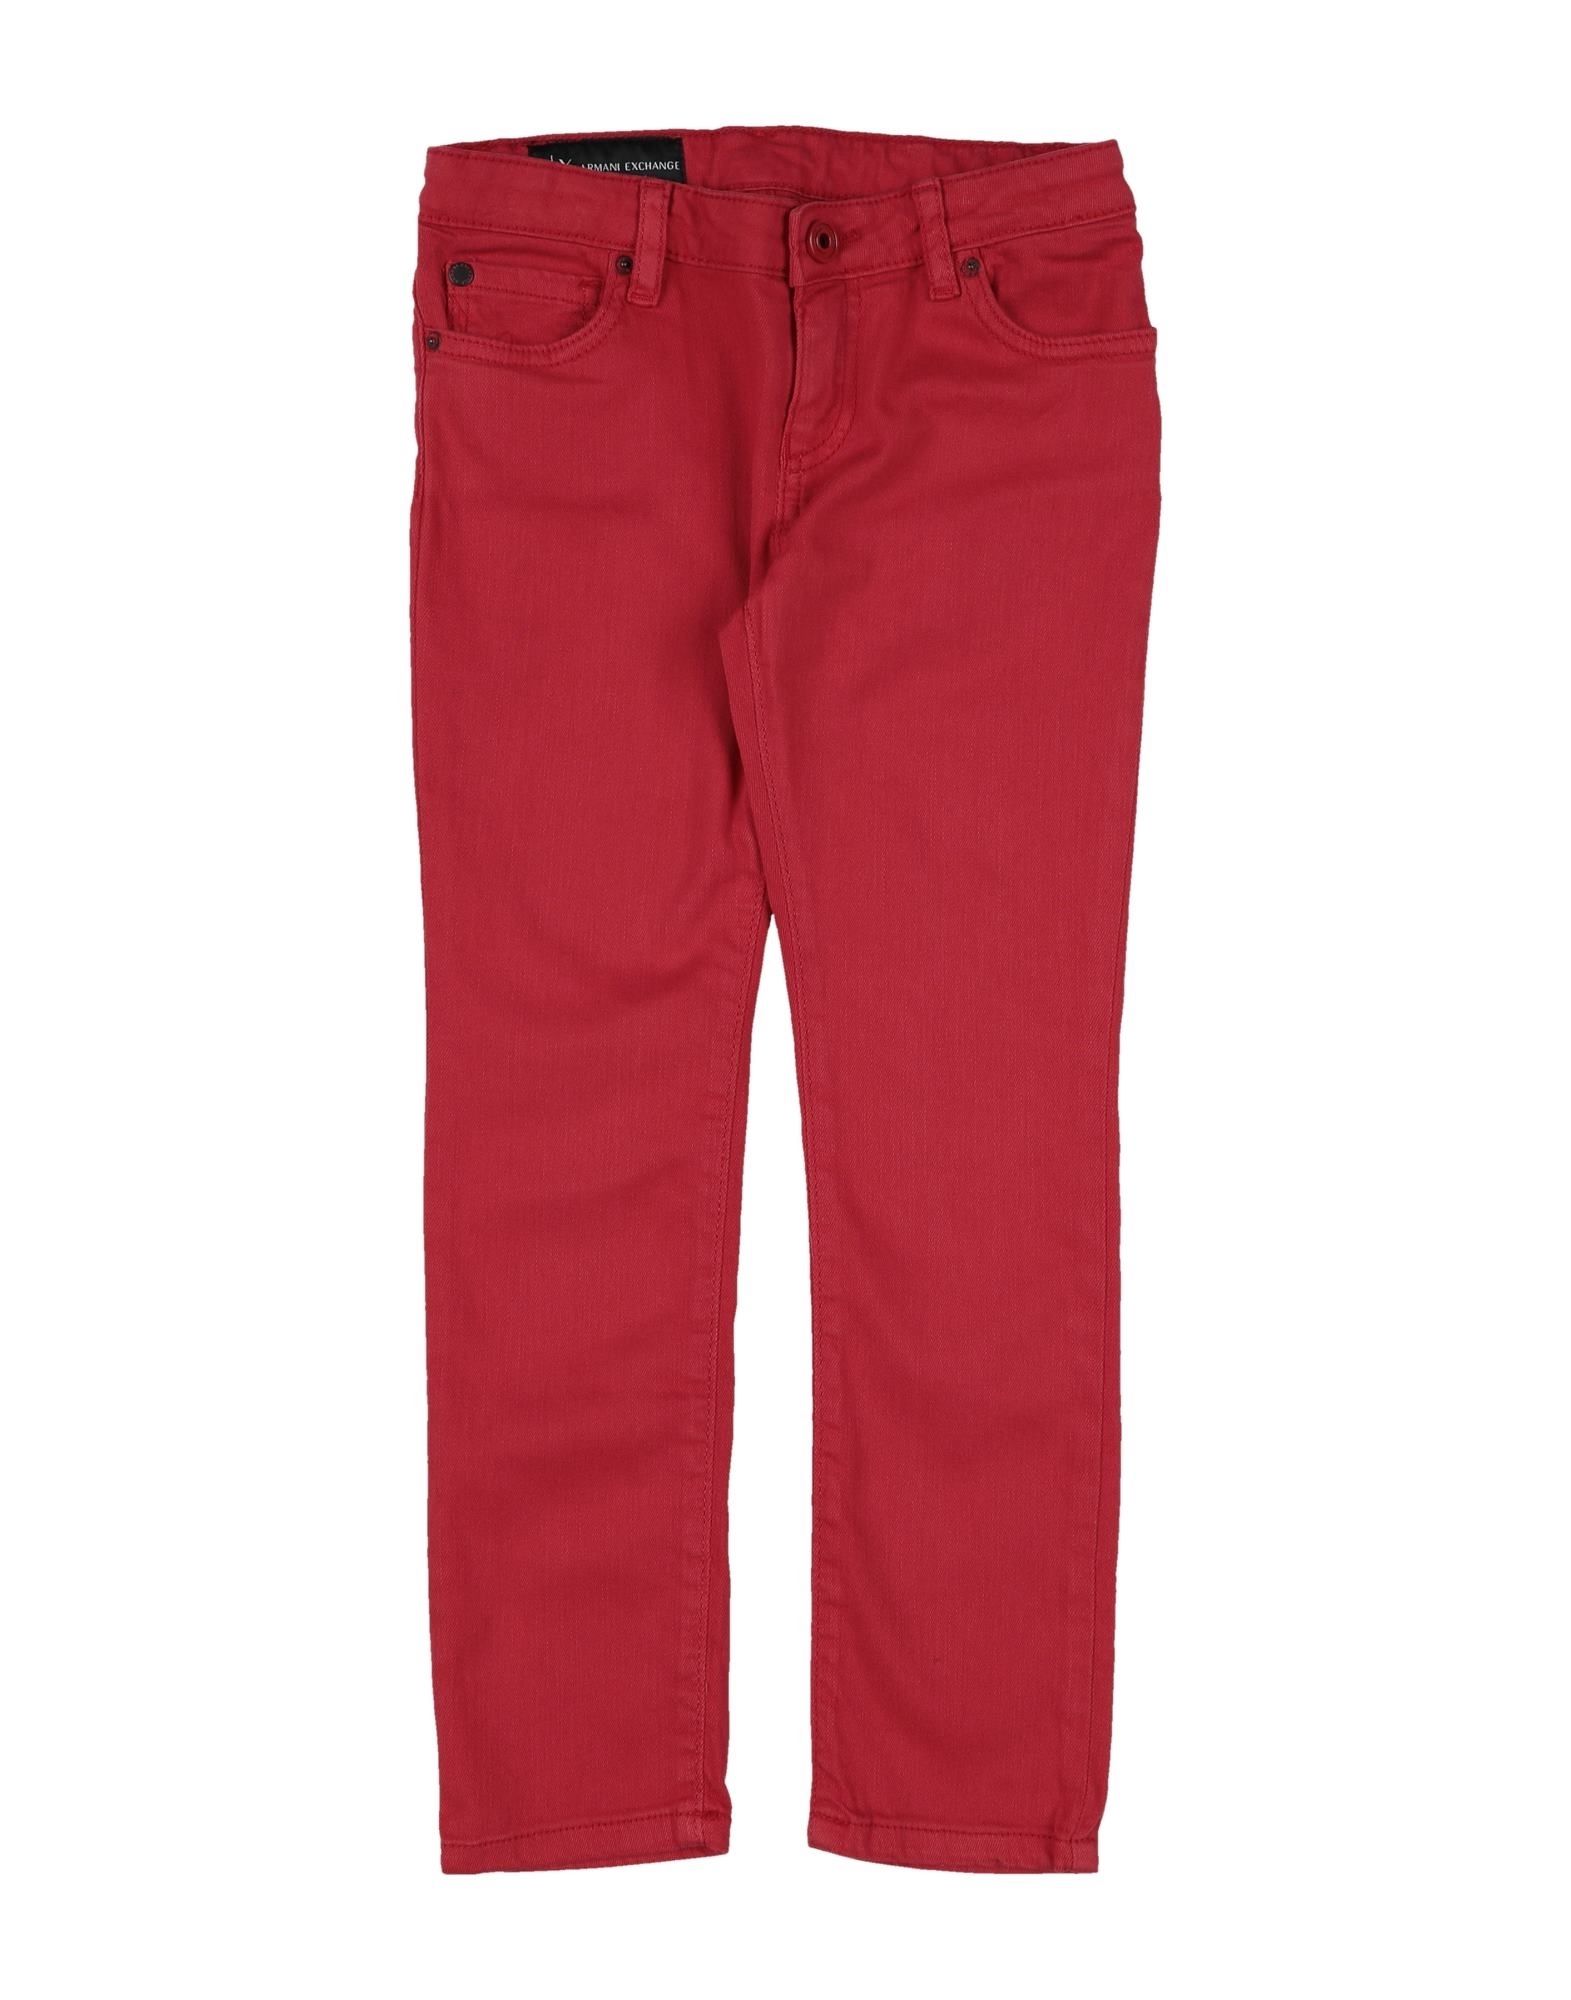 Armani Exchange Kids' Jeans In Red